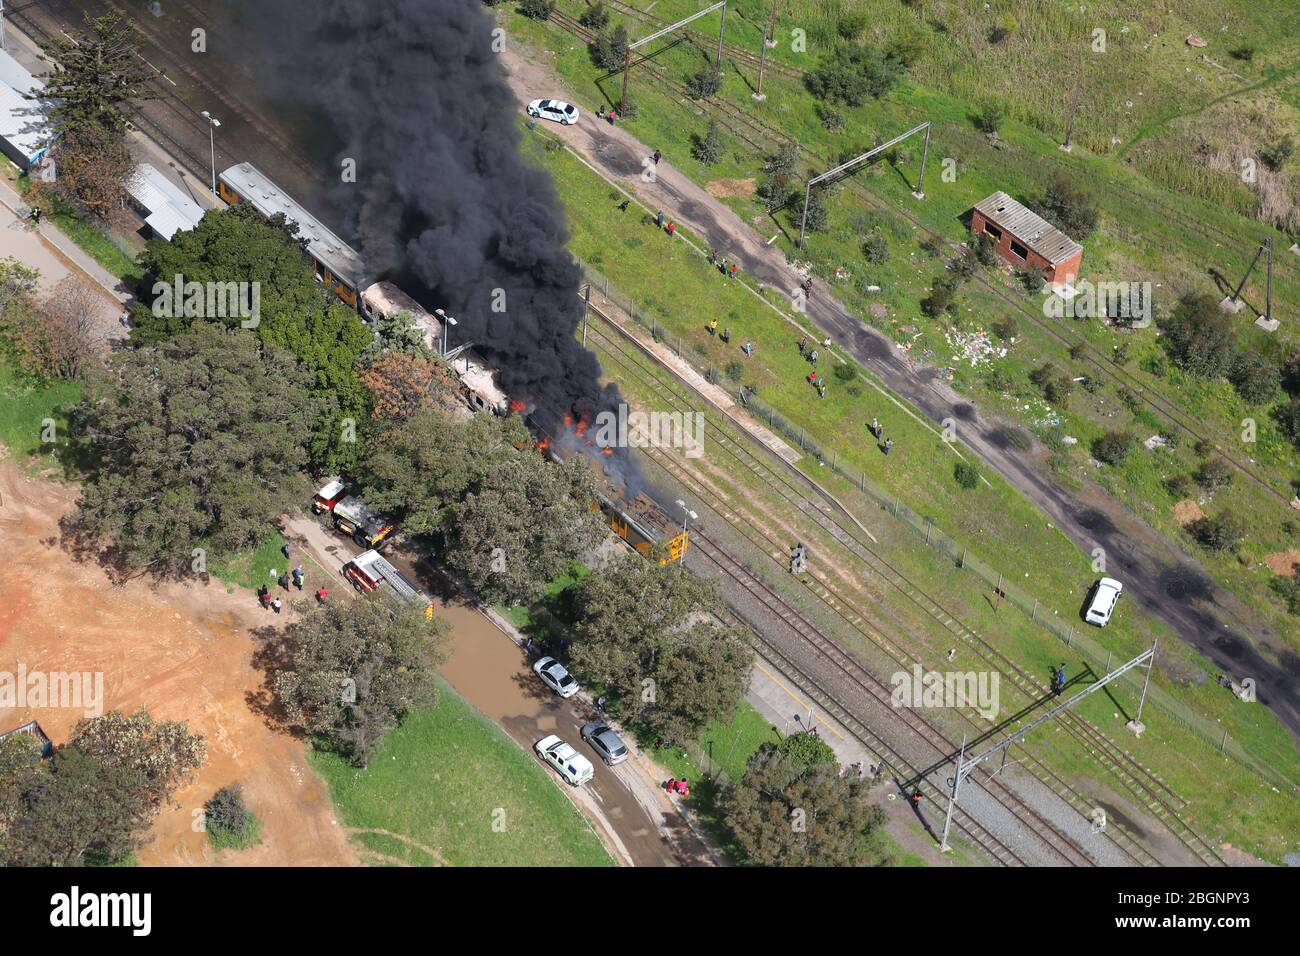 Aerial photo of a Metrorail train on fire Stock Photo